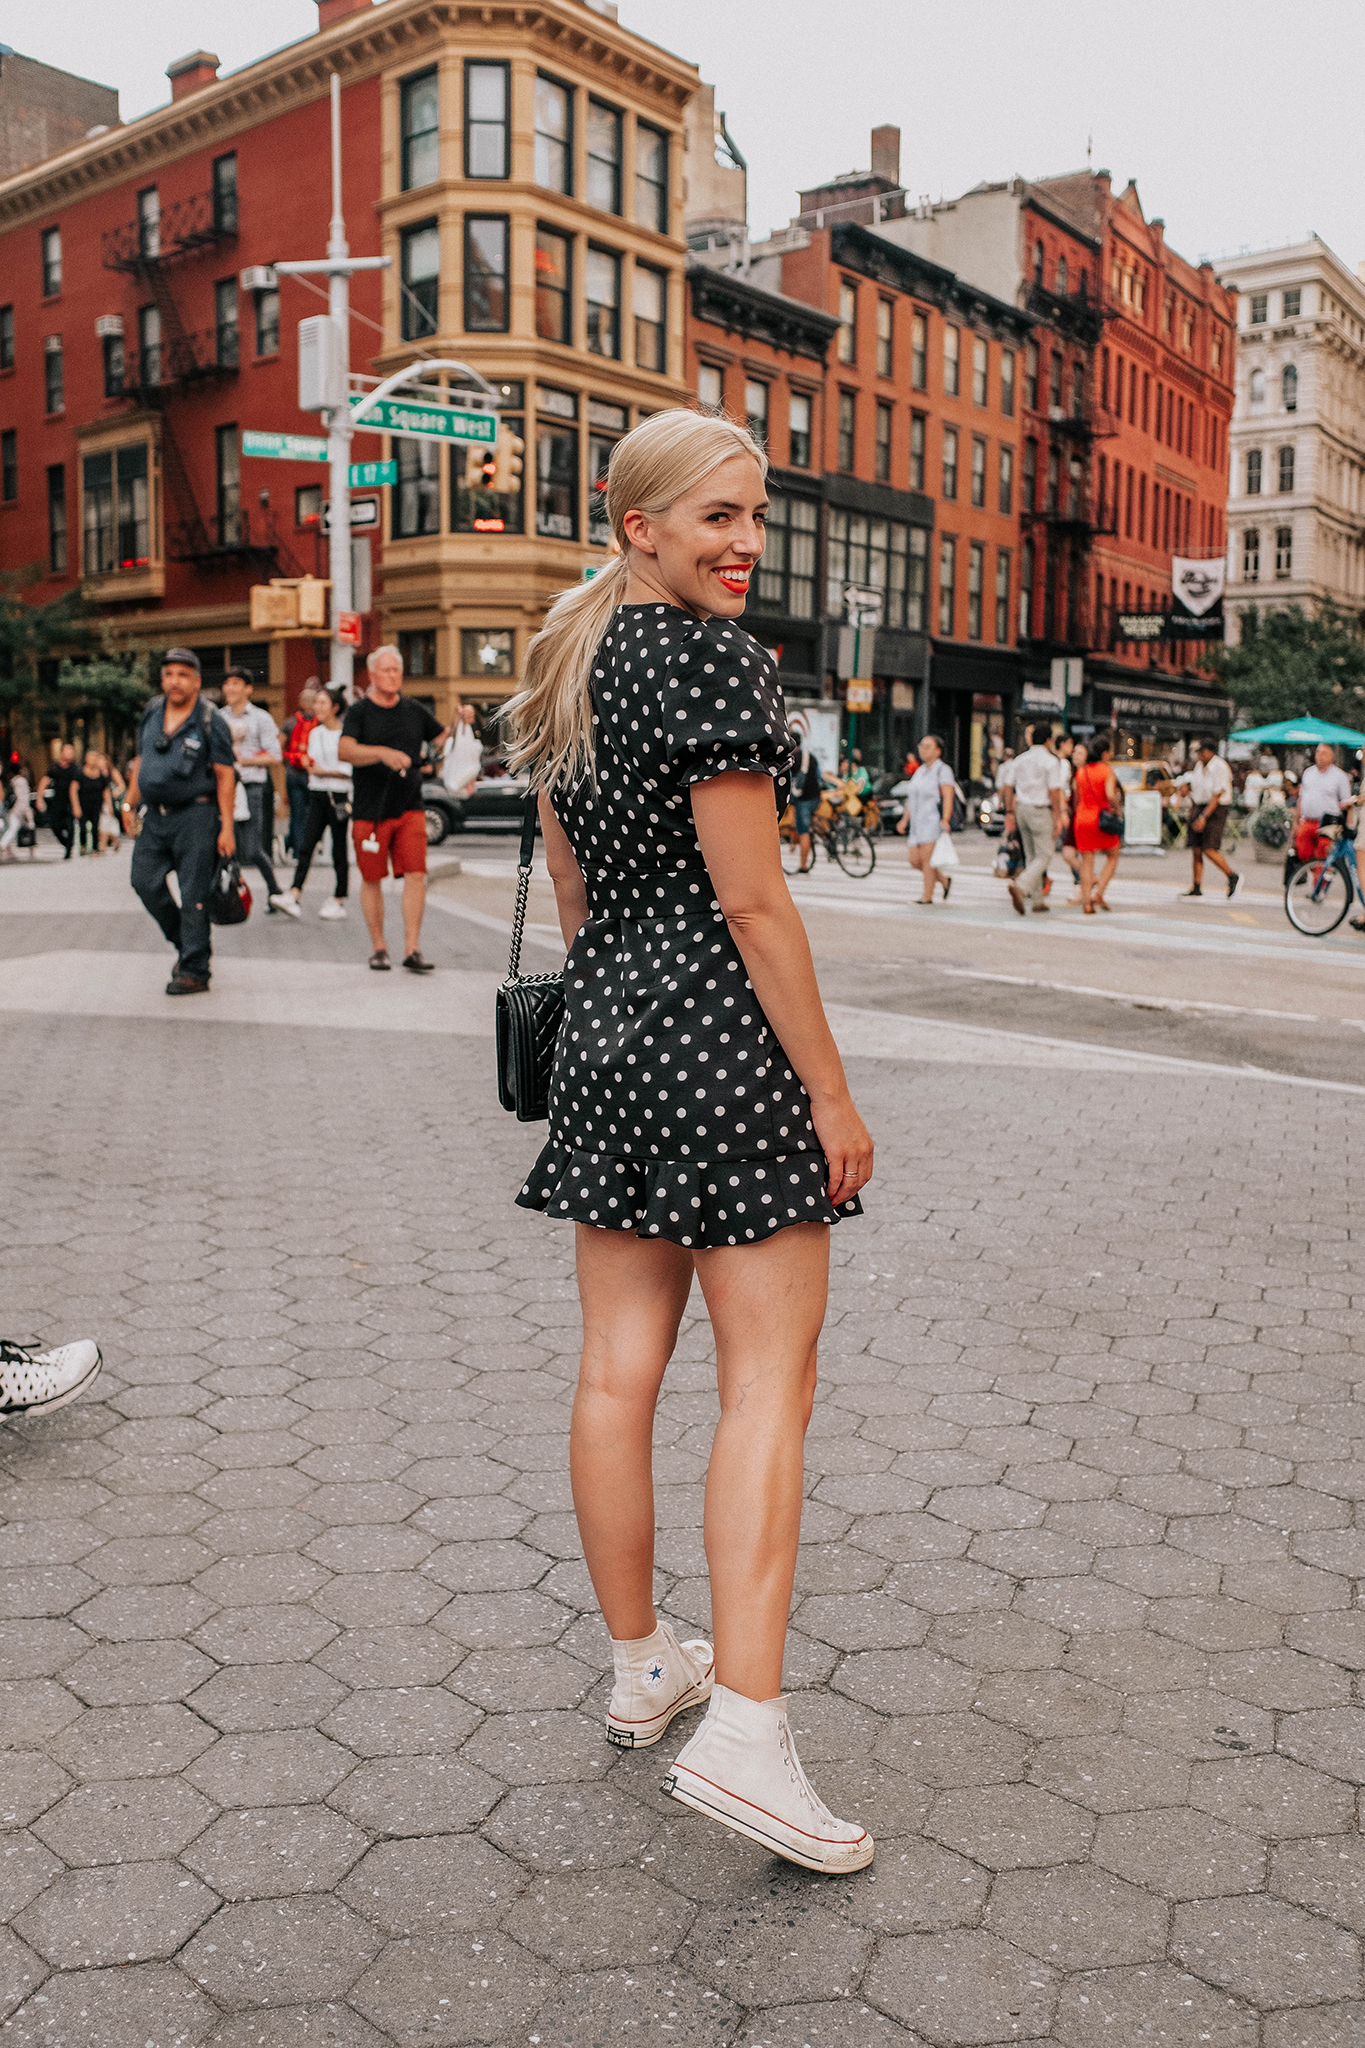 woman in the streets, smiling and wearing polka dot dress and white sneakers